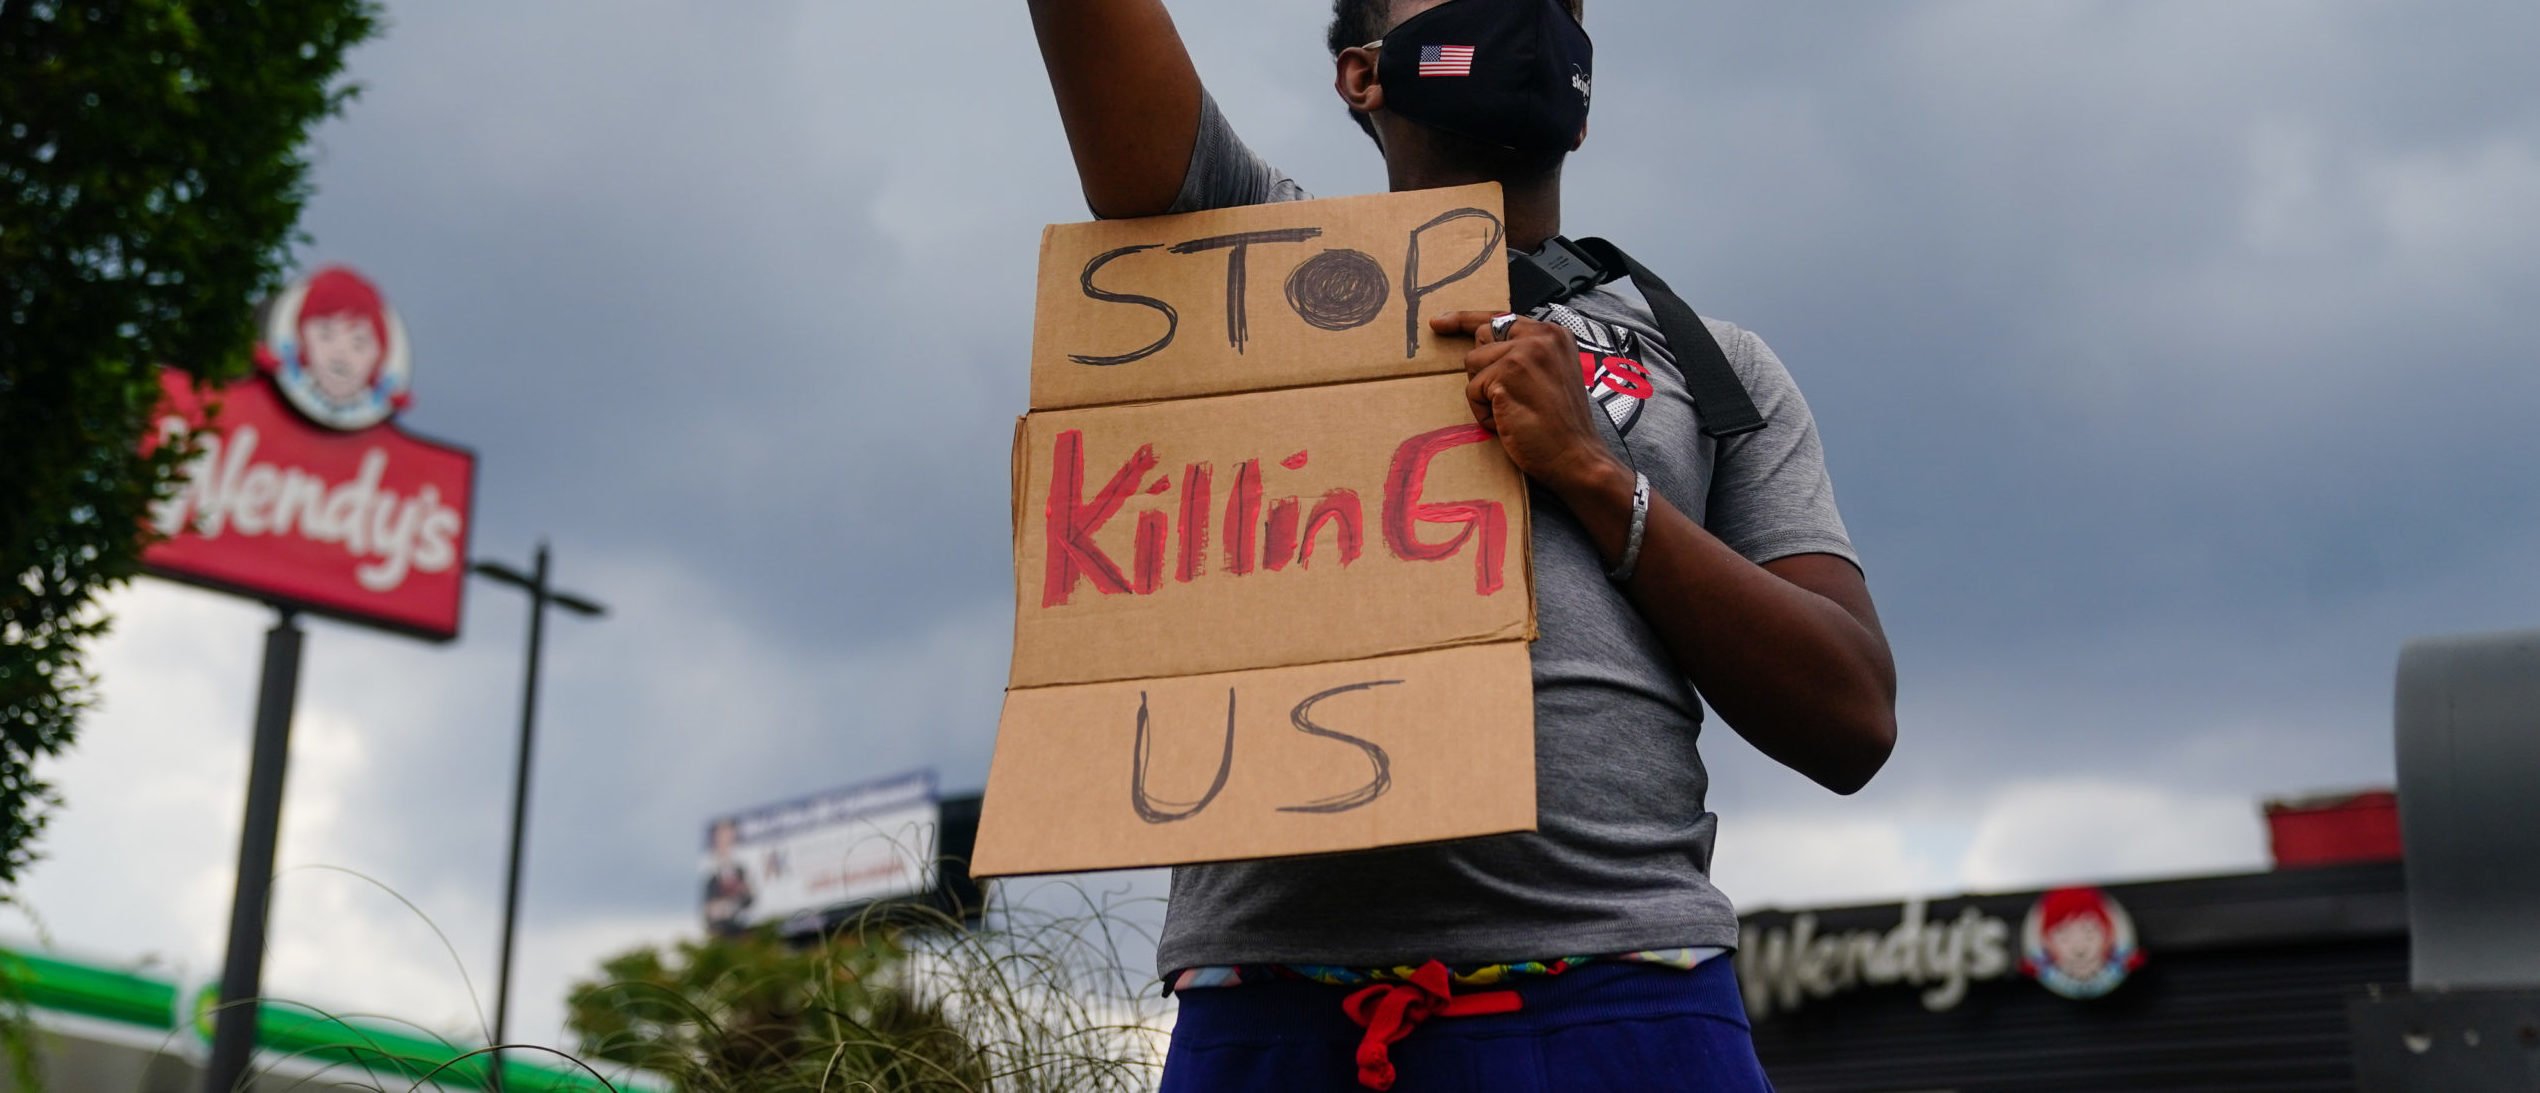 Atlanta Homicides Reportedly Hit Record Highs The Daily Caller